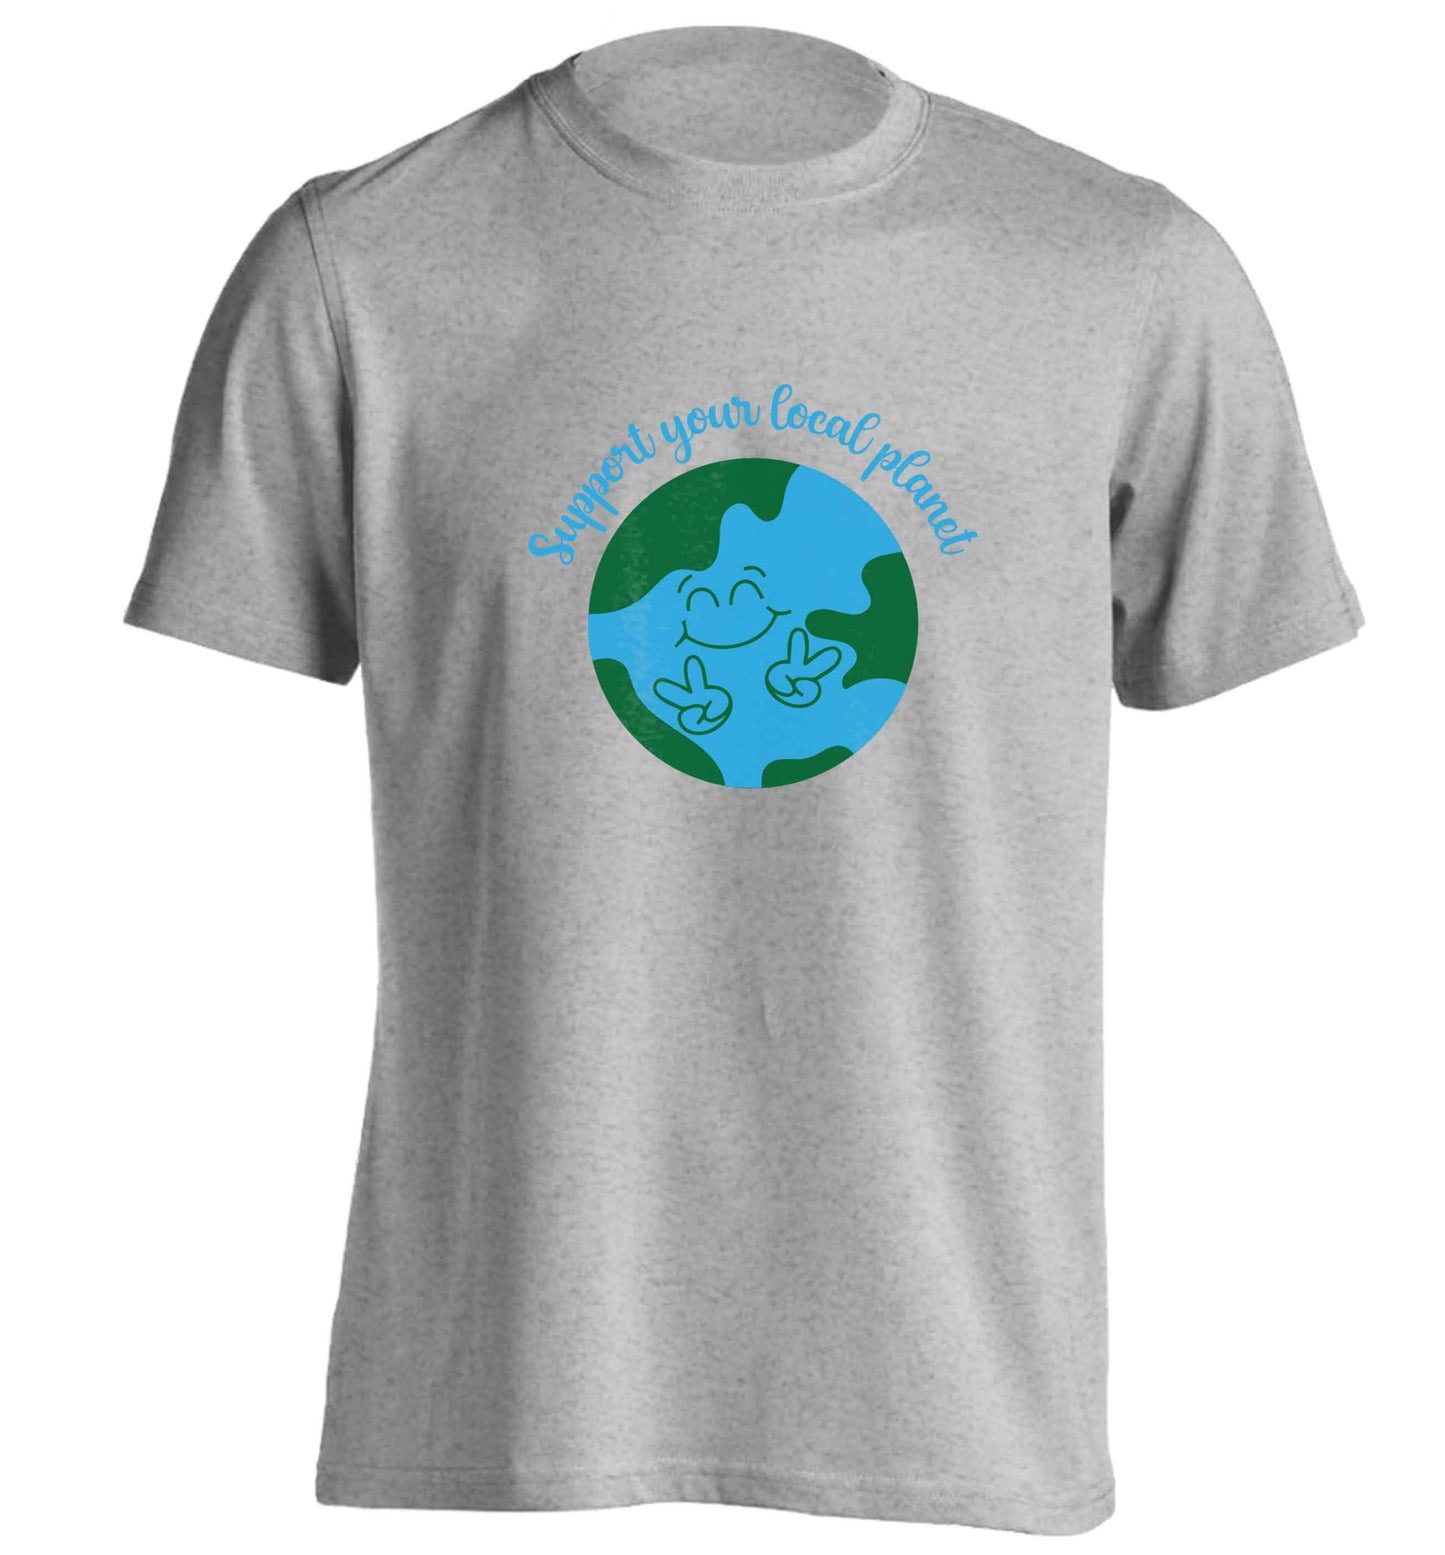 Support your local planet adults unisex grey Tshirt 2XL